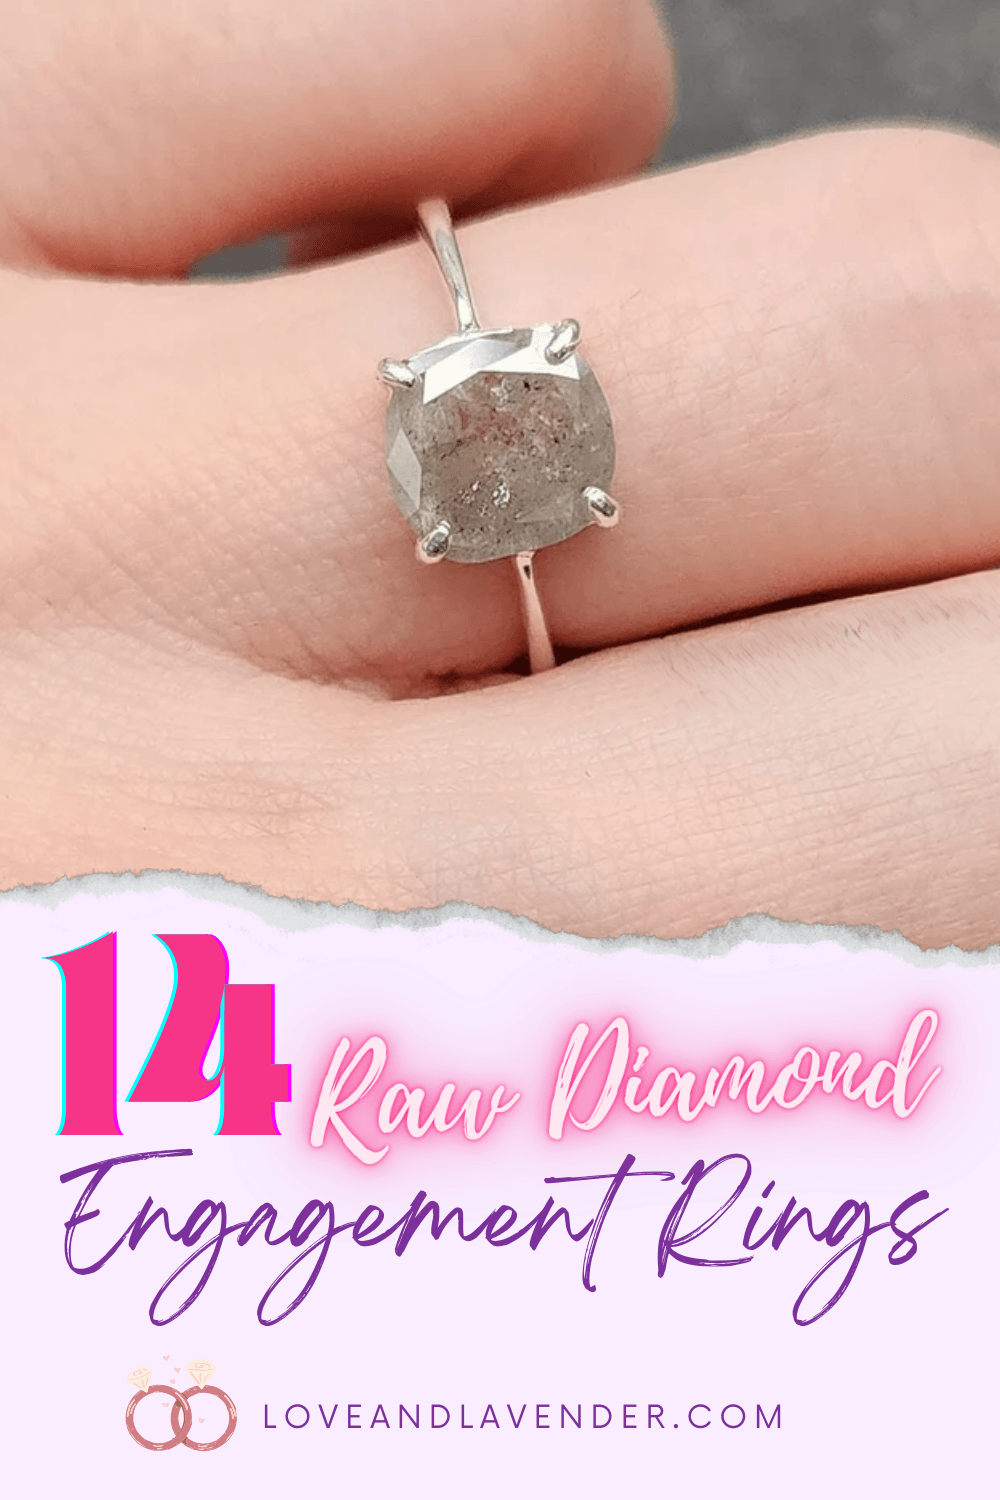 14 Raw Diamond Engagement Rings as a Beautiful Budget Ring Option